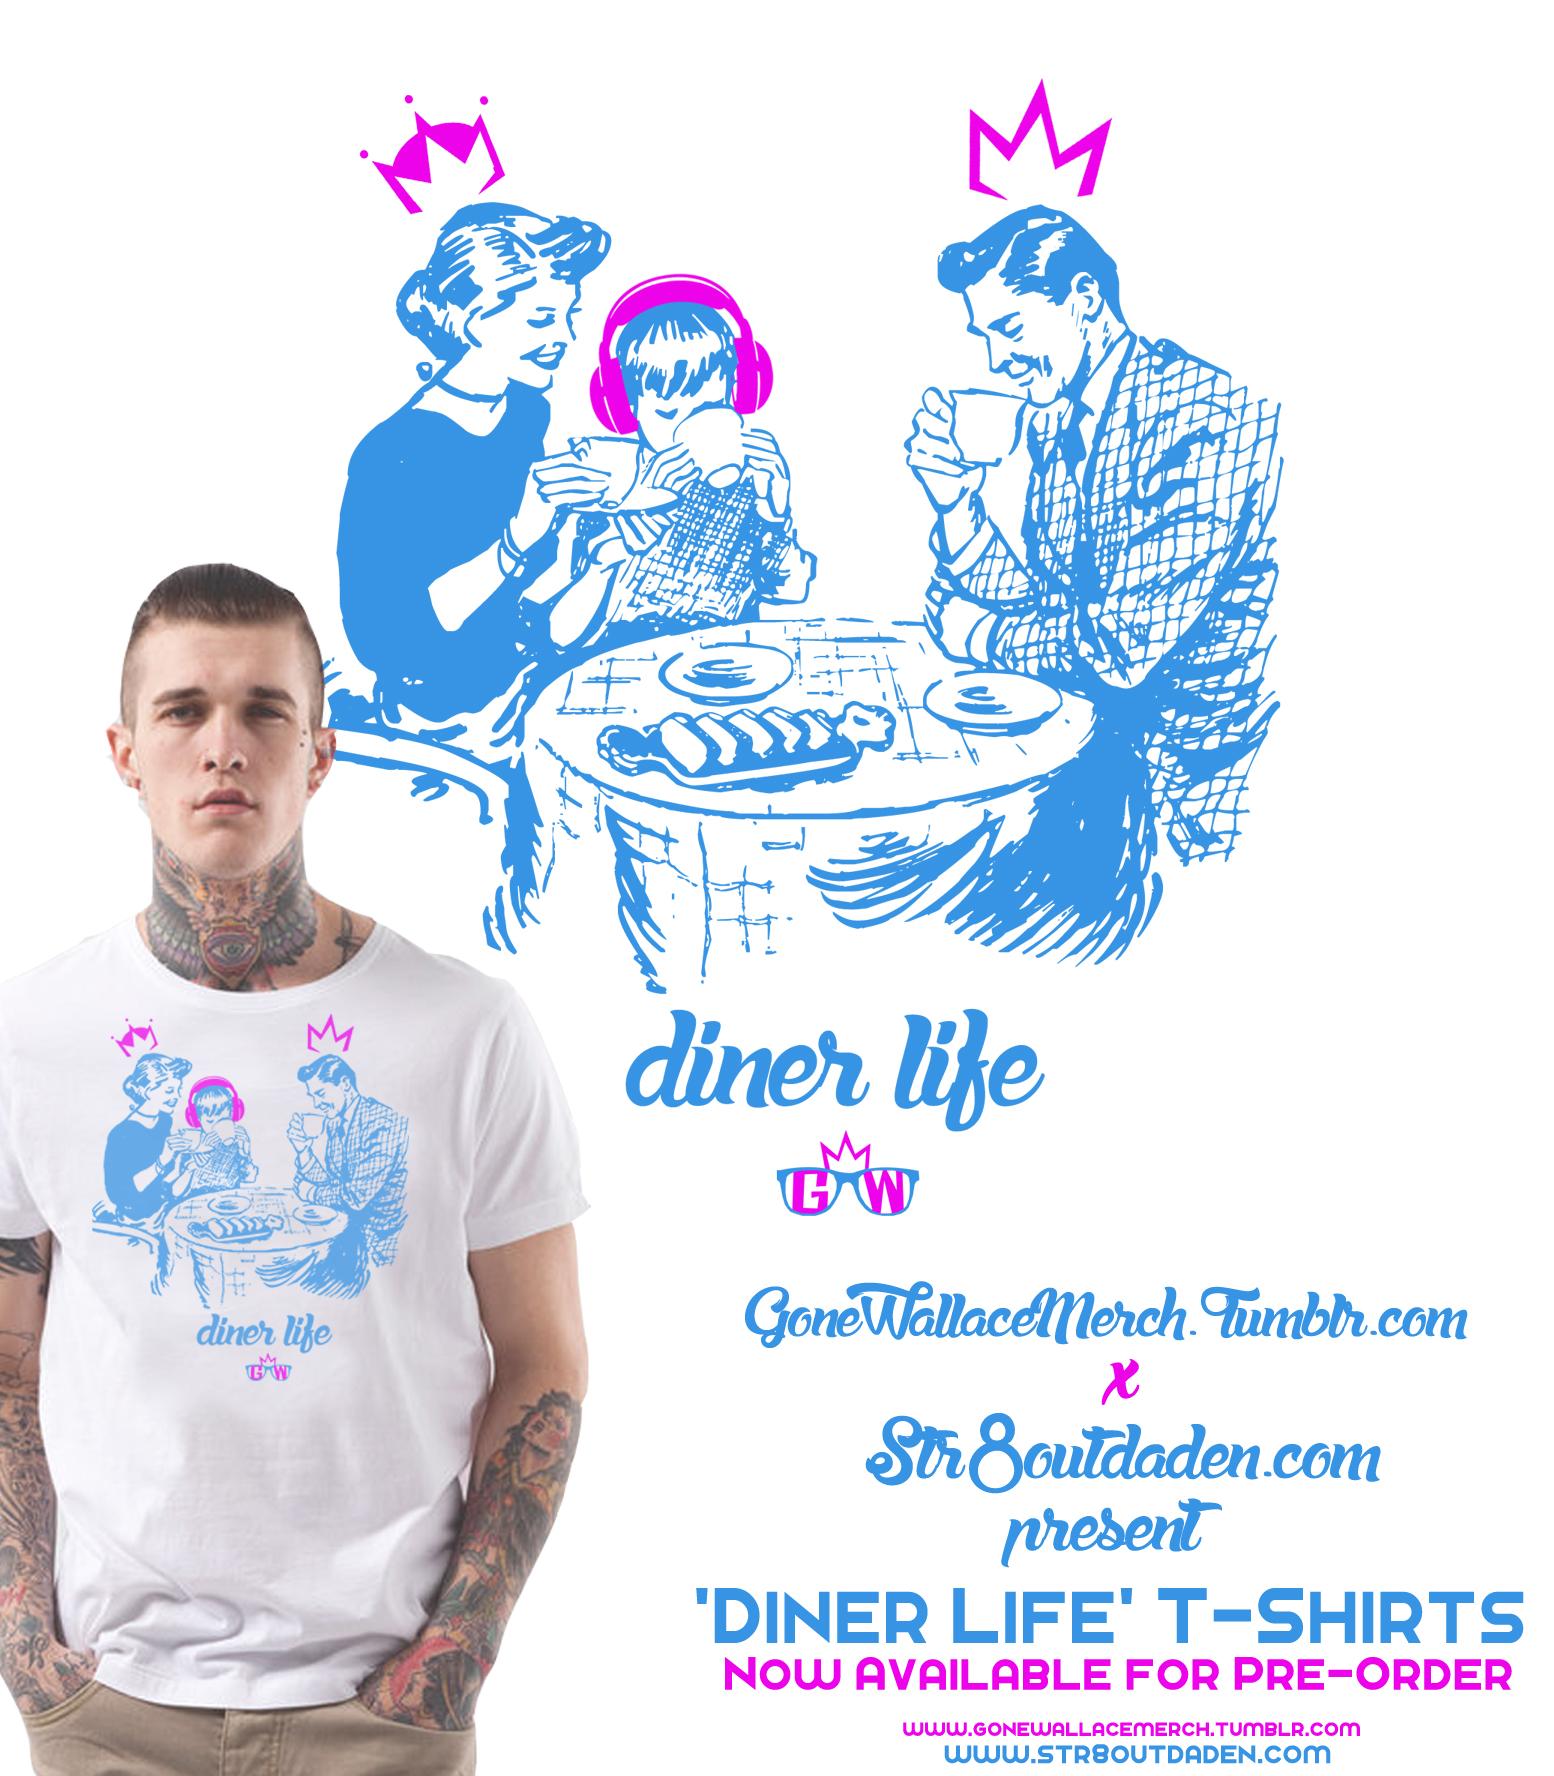 Pick Up The Limited Edition “Diner Life” T-Shirt via Gone Wallace Merch